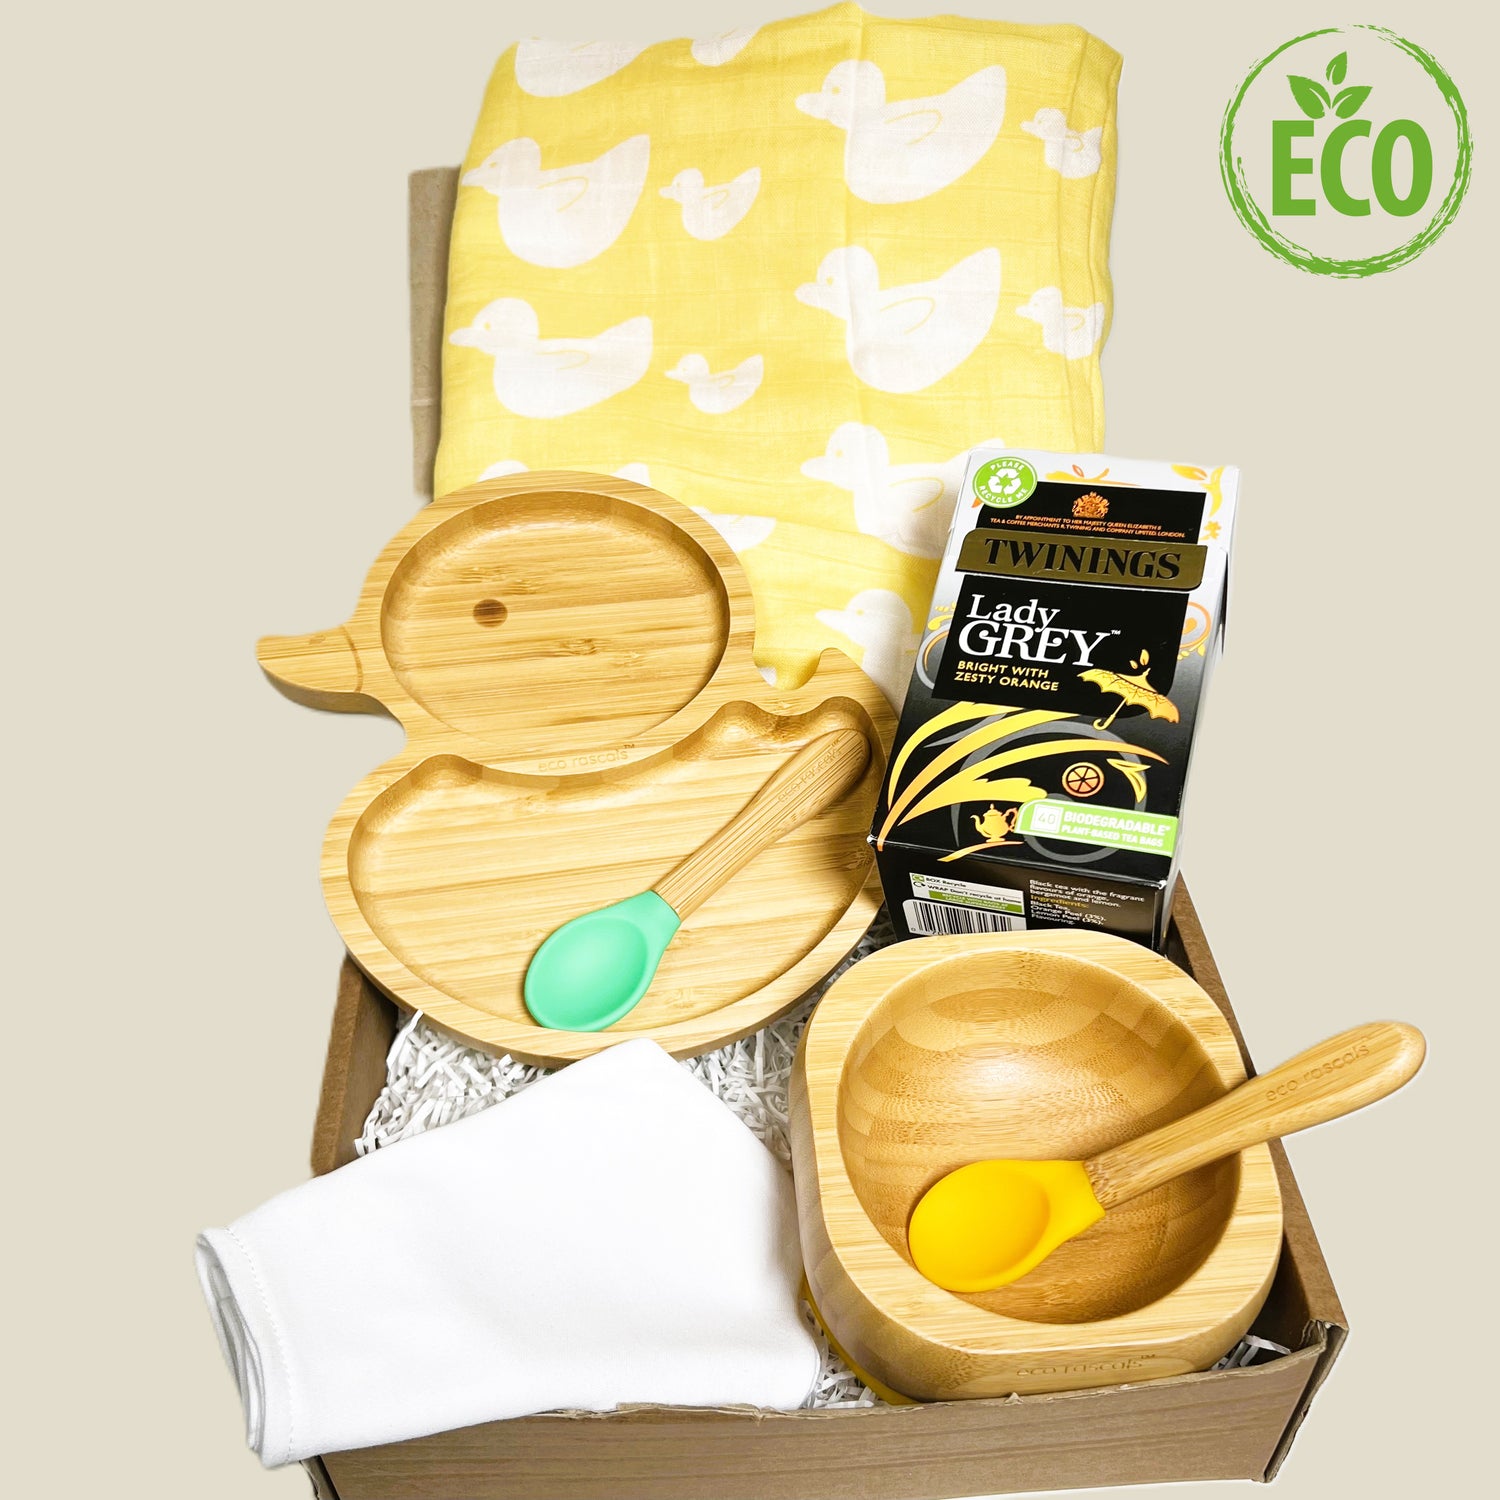 Baby weaning gift with a bamboo duck shaped plate and a bamboo bowl both with silicone and bamboo baby spoons, a large yellow and white bamboo baby muslin and a packet of Earl grey Twinings teabags